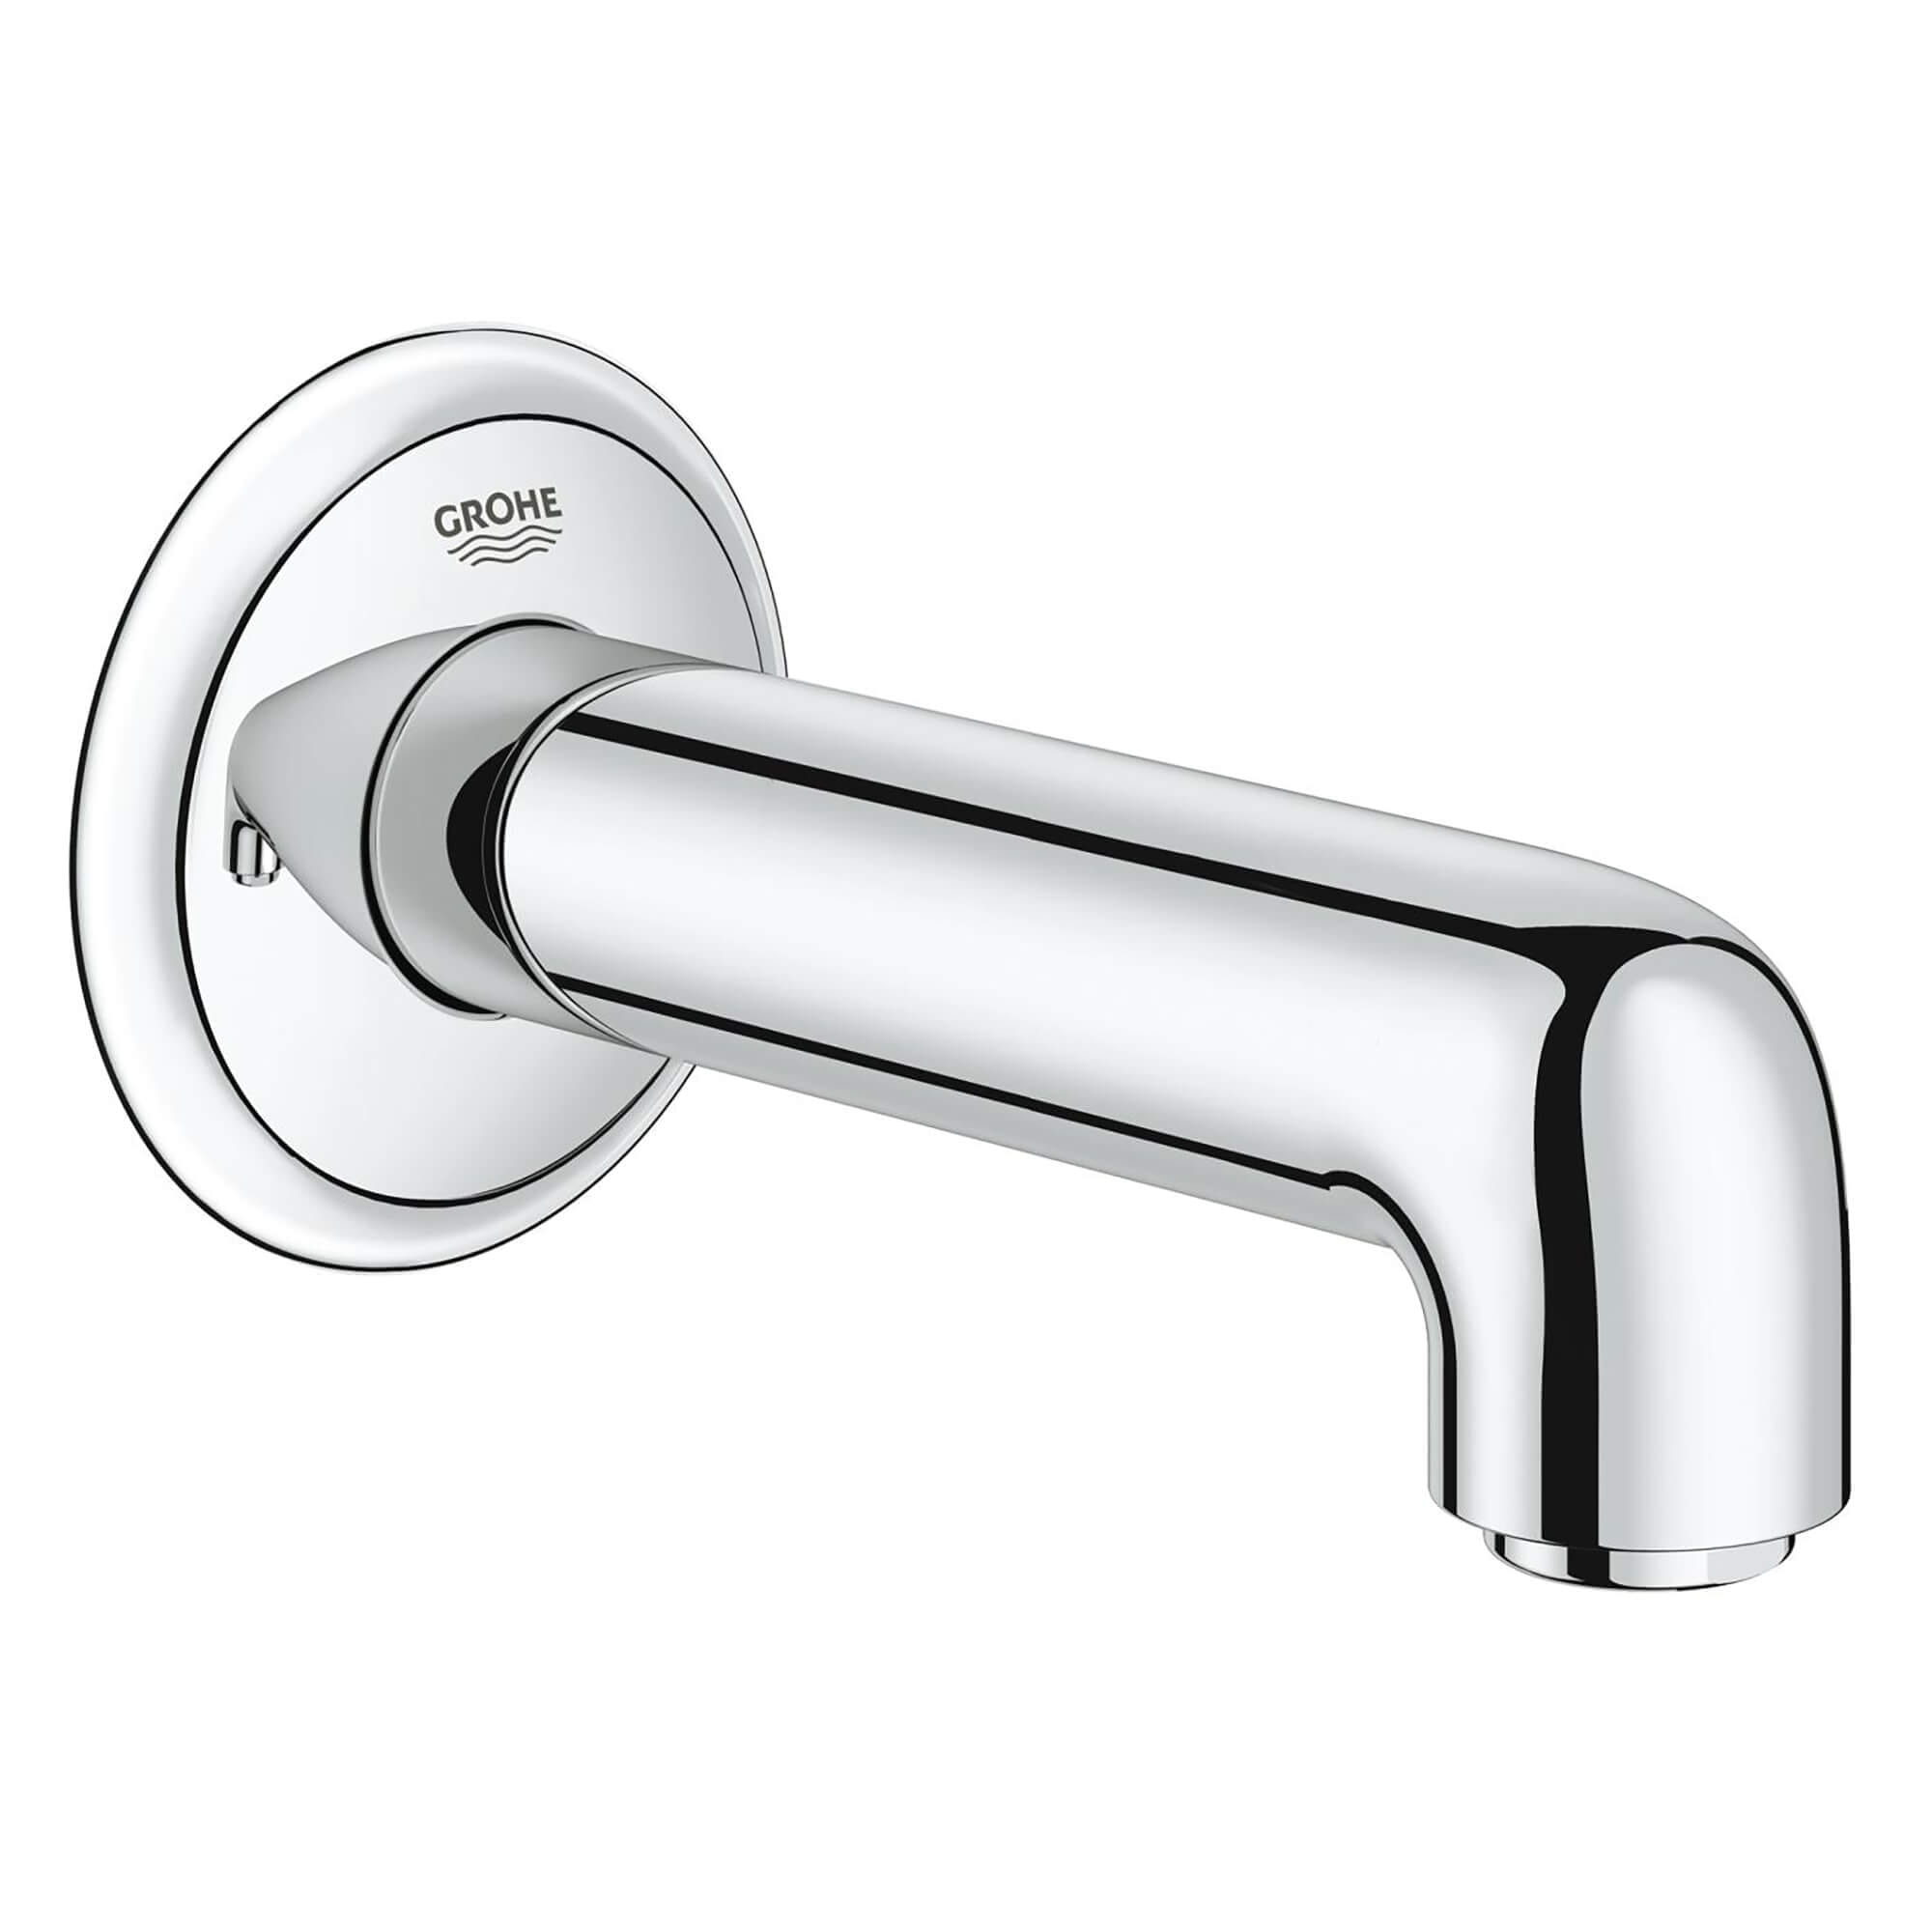 TUB SPOUT Model: 13345000-related